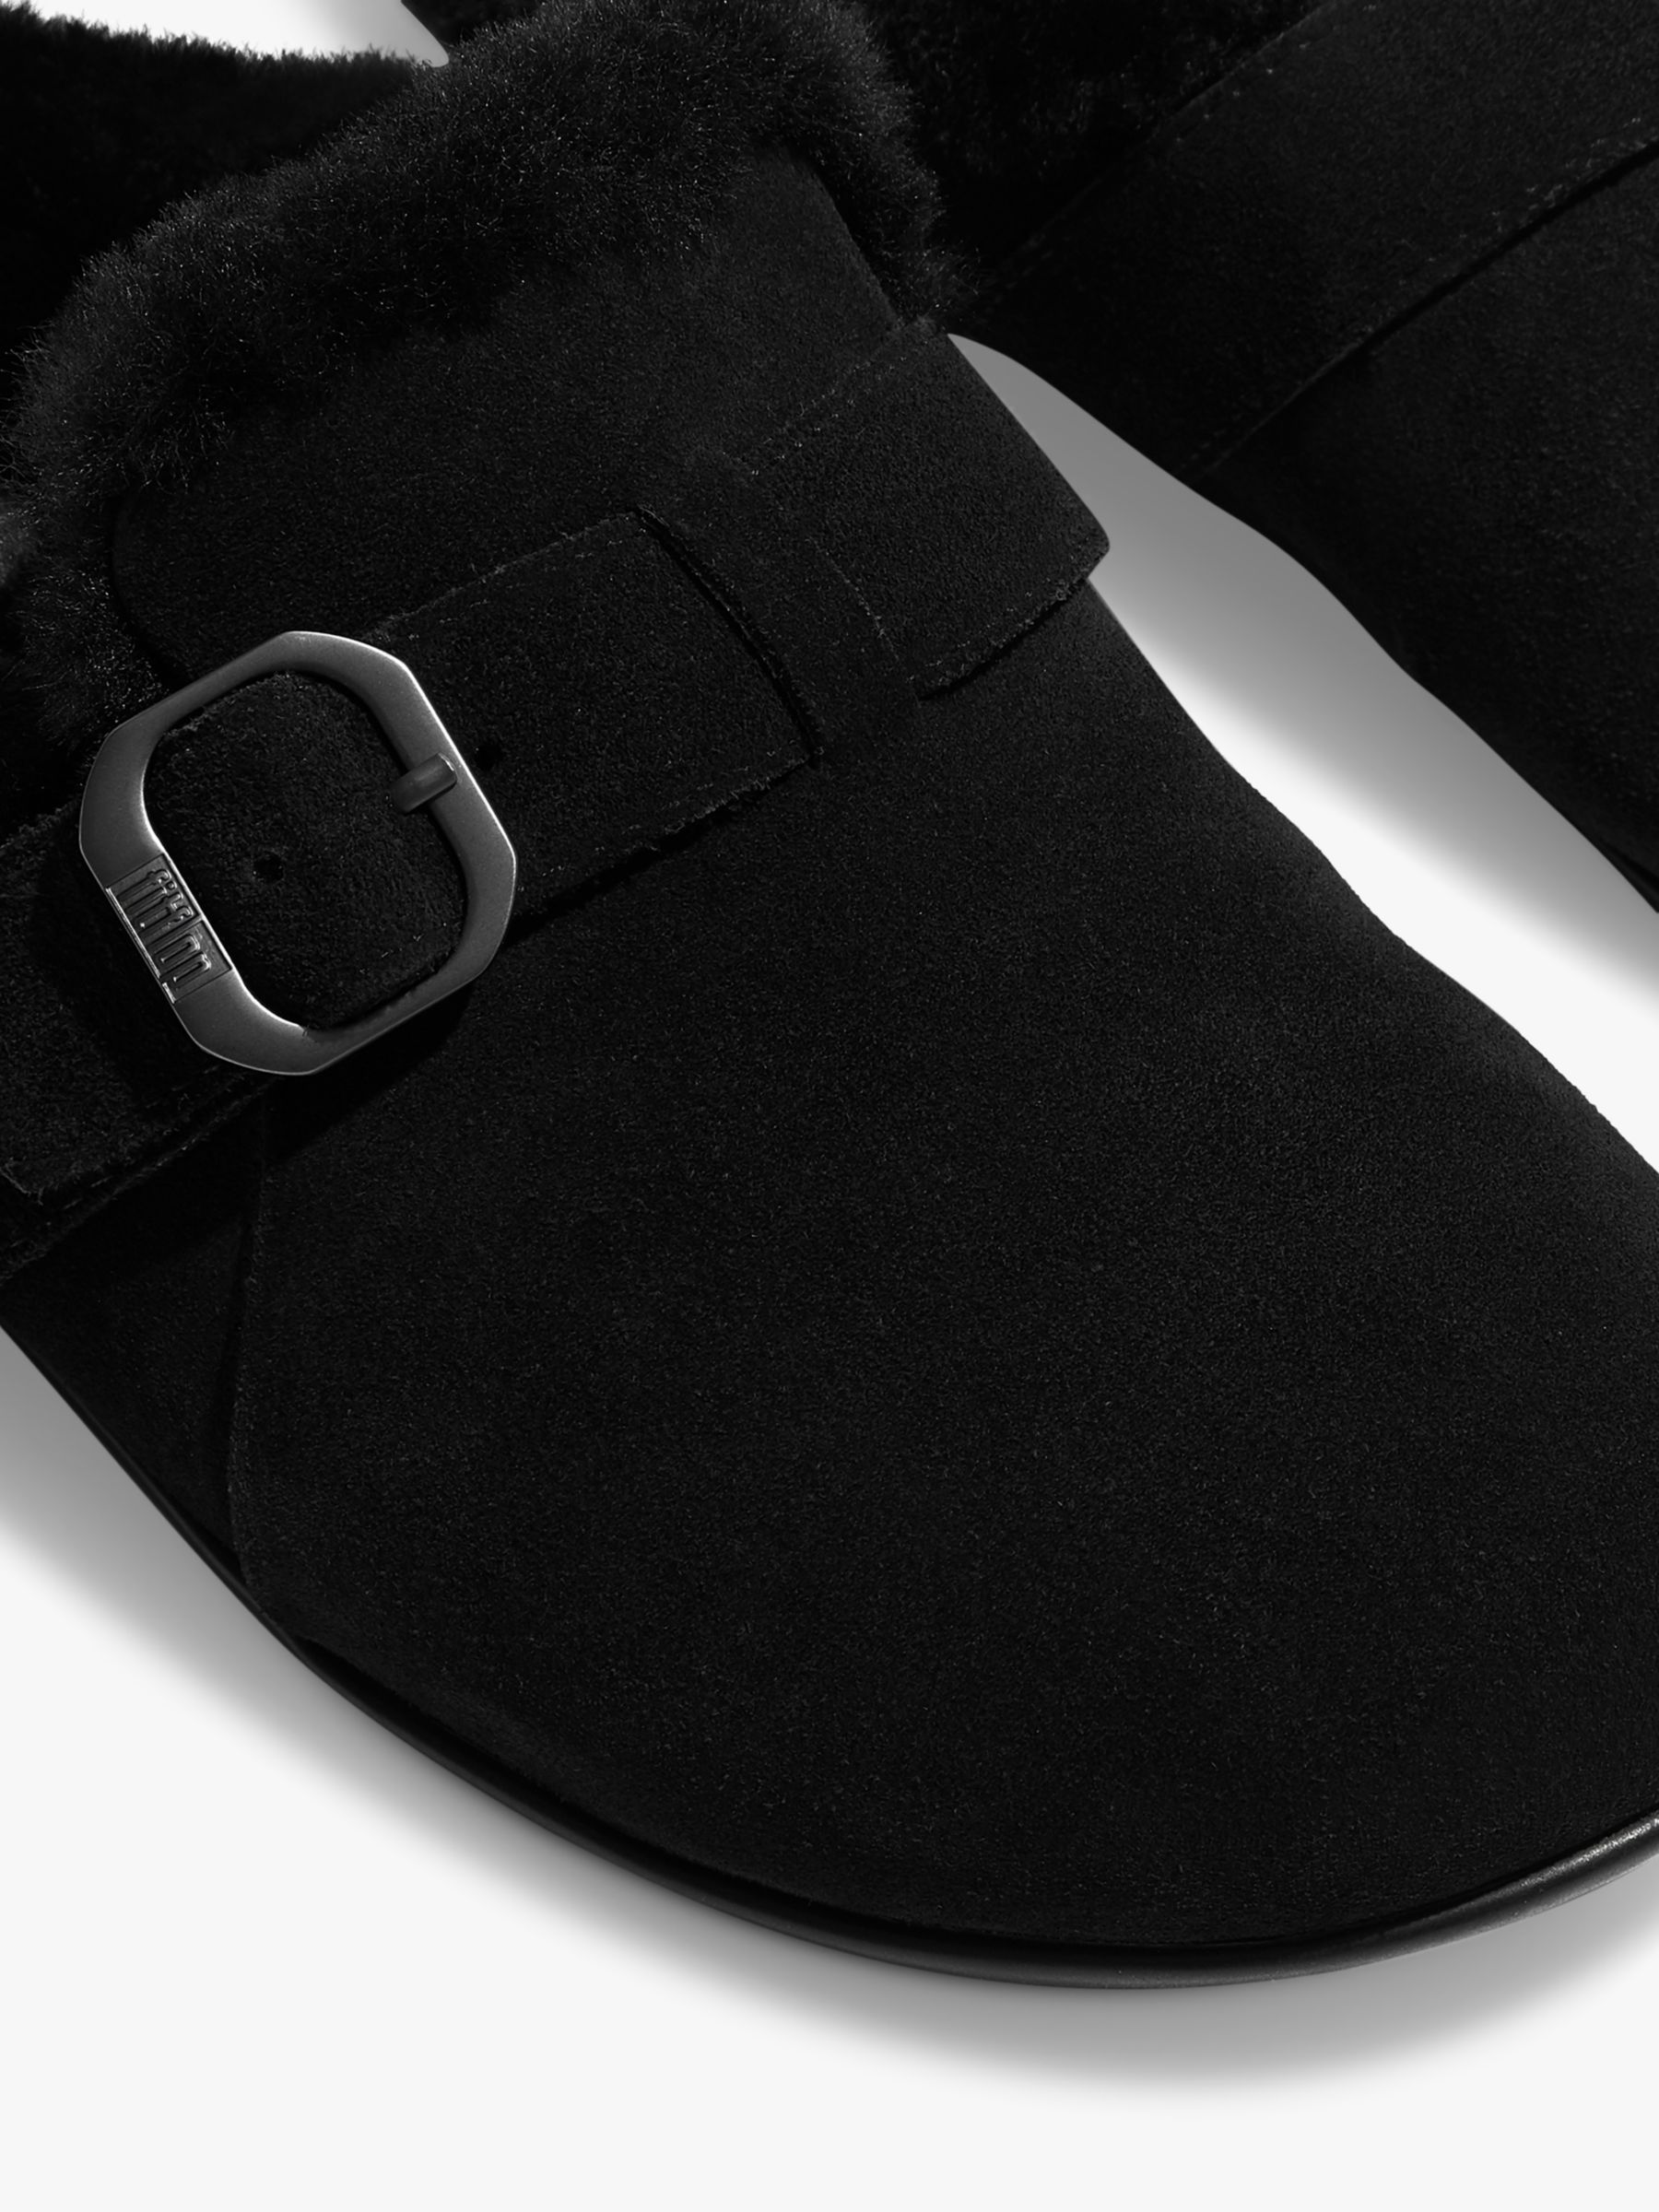 FitFlop Chrissie Shearling Lined Suede Slippers, Black, 6